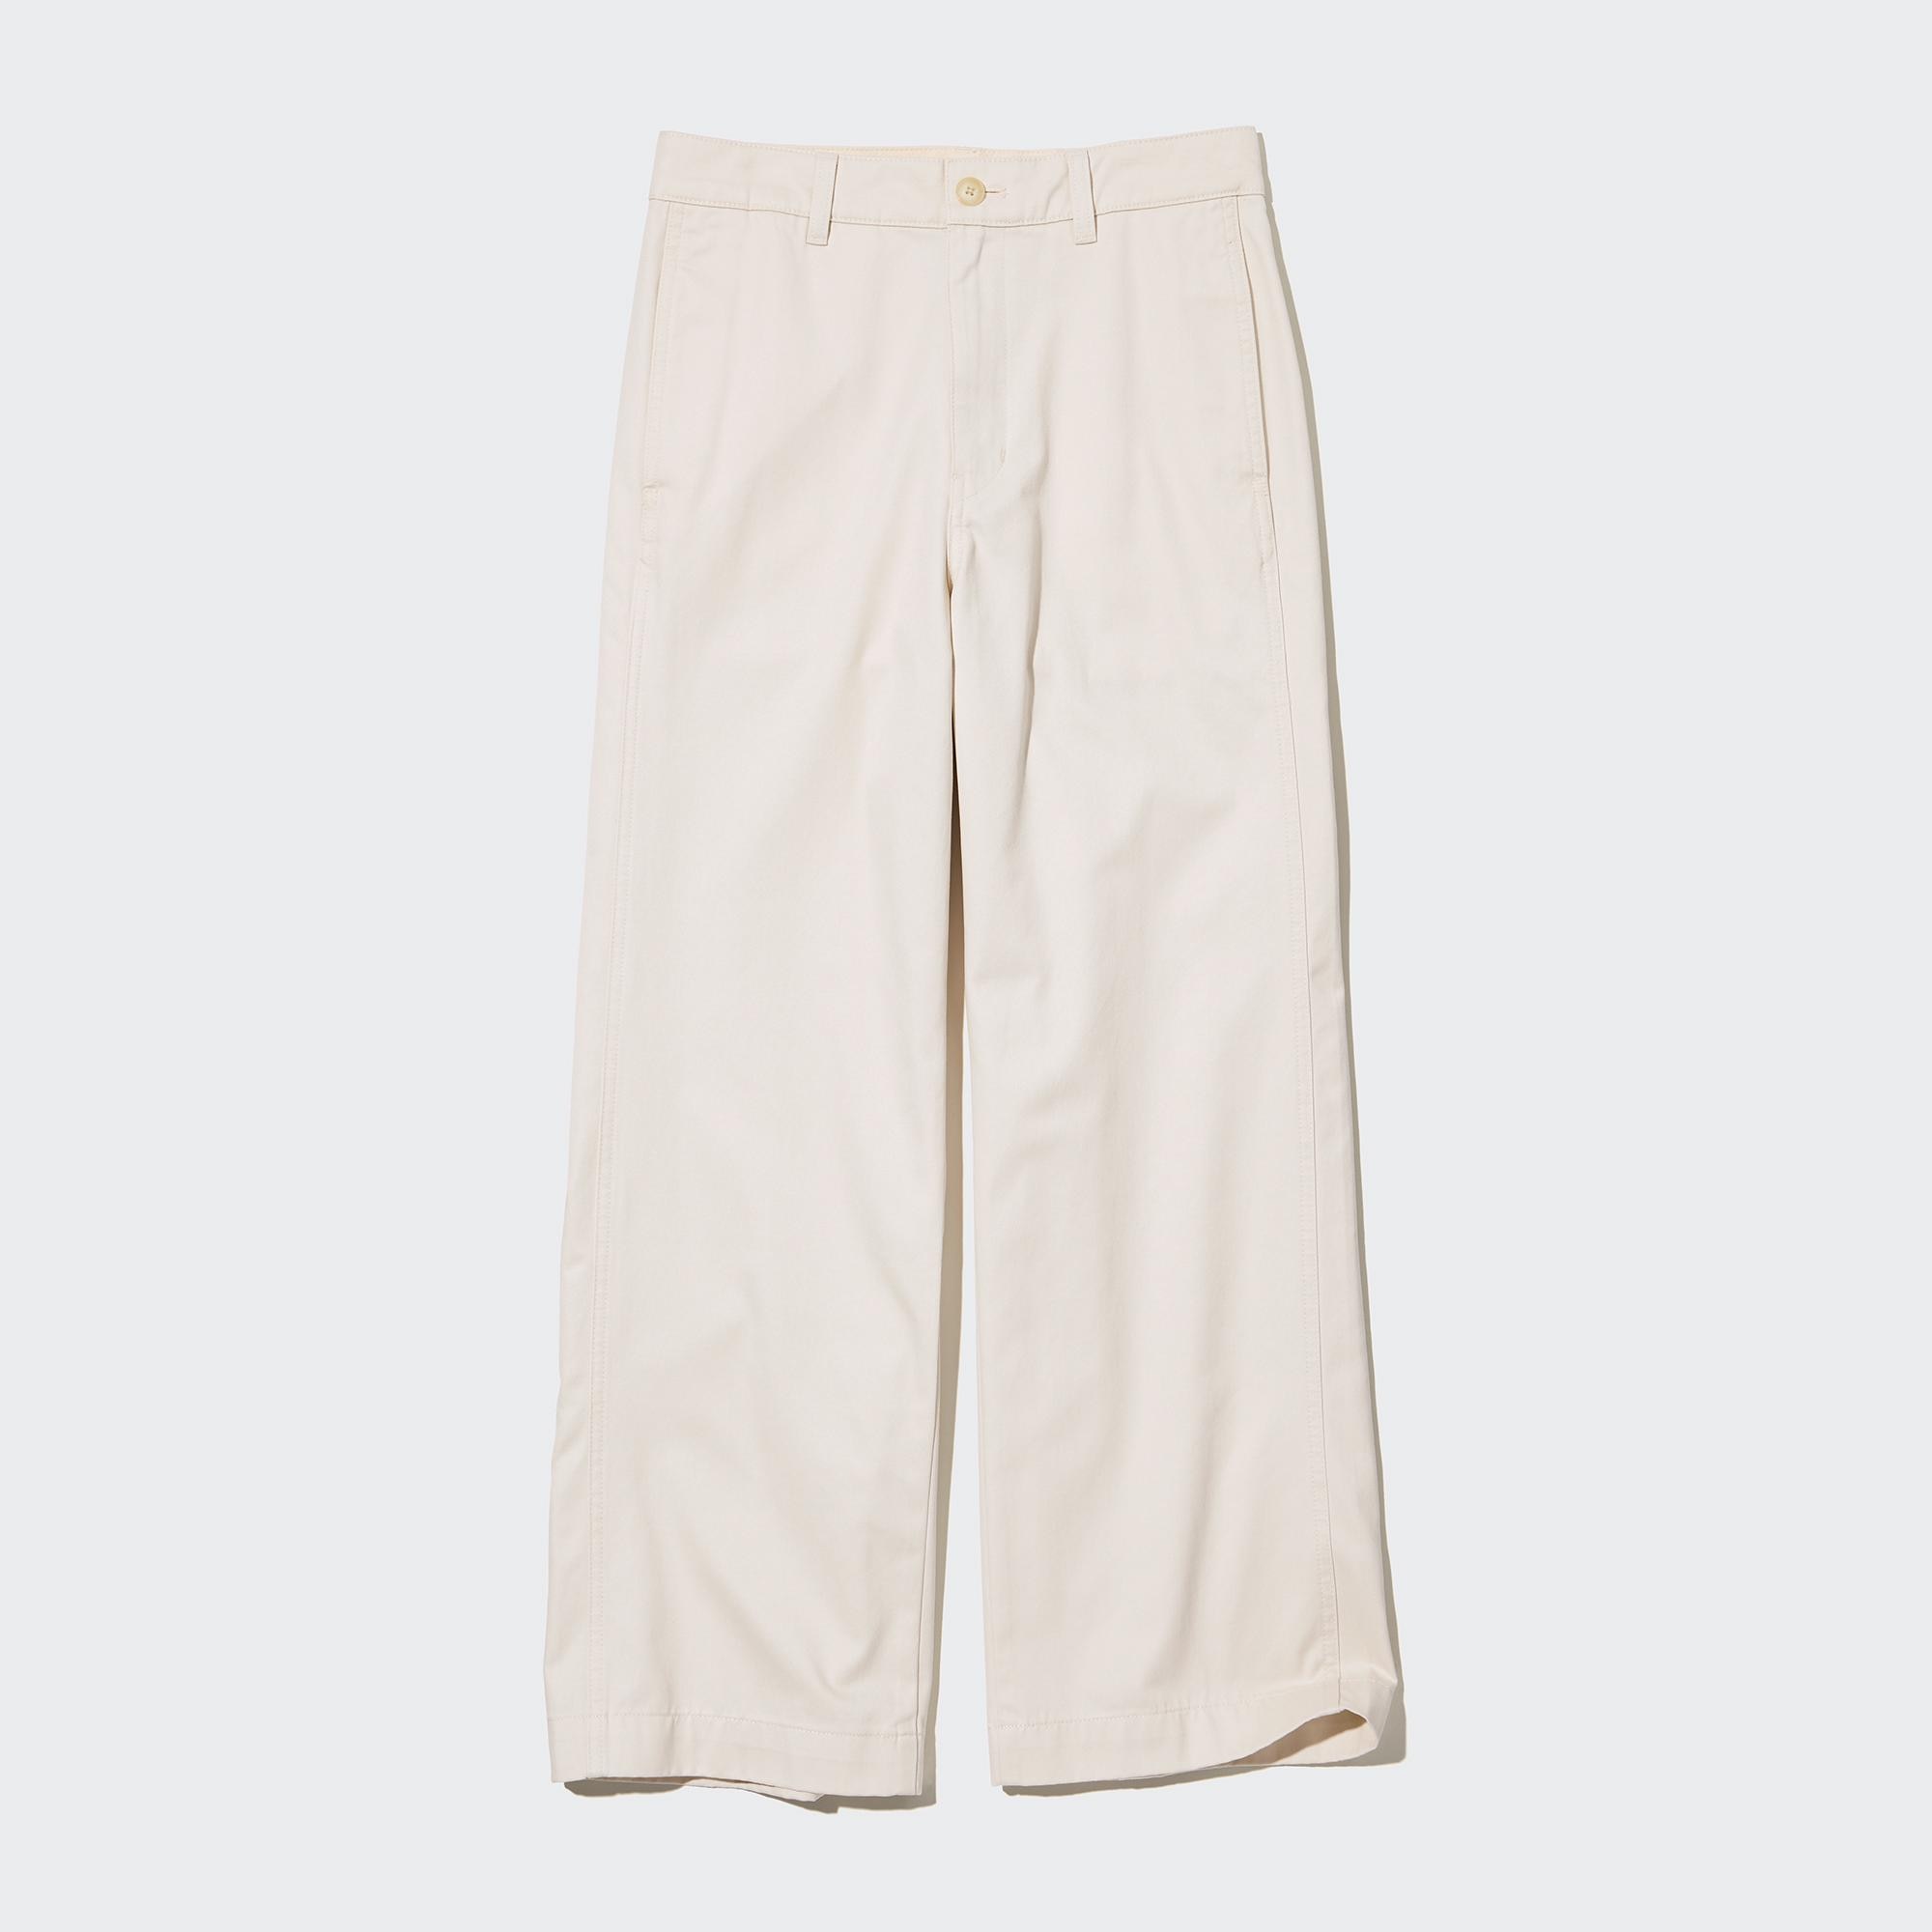 White High Waist Trousers  Buy White High Waist Trousers online in India